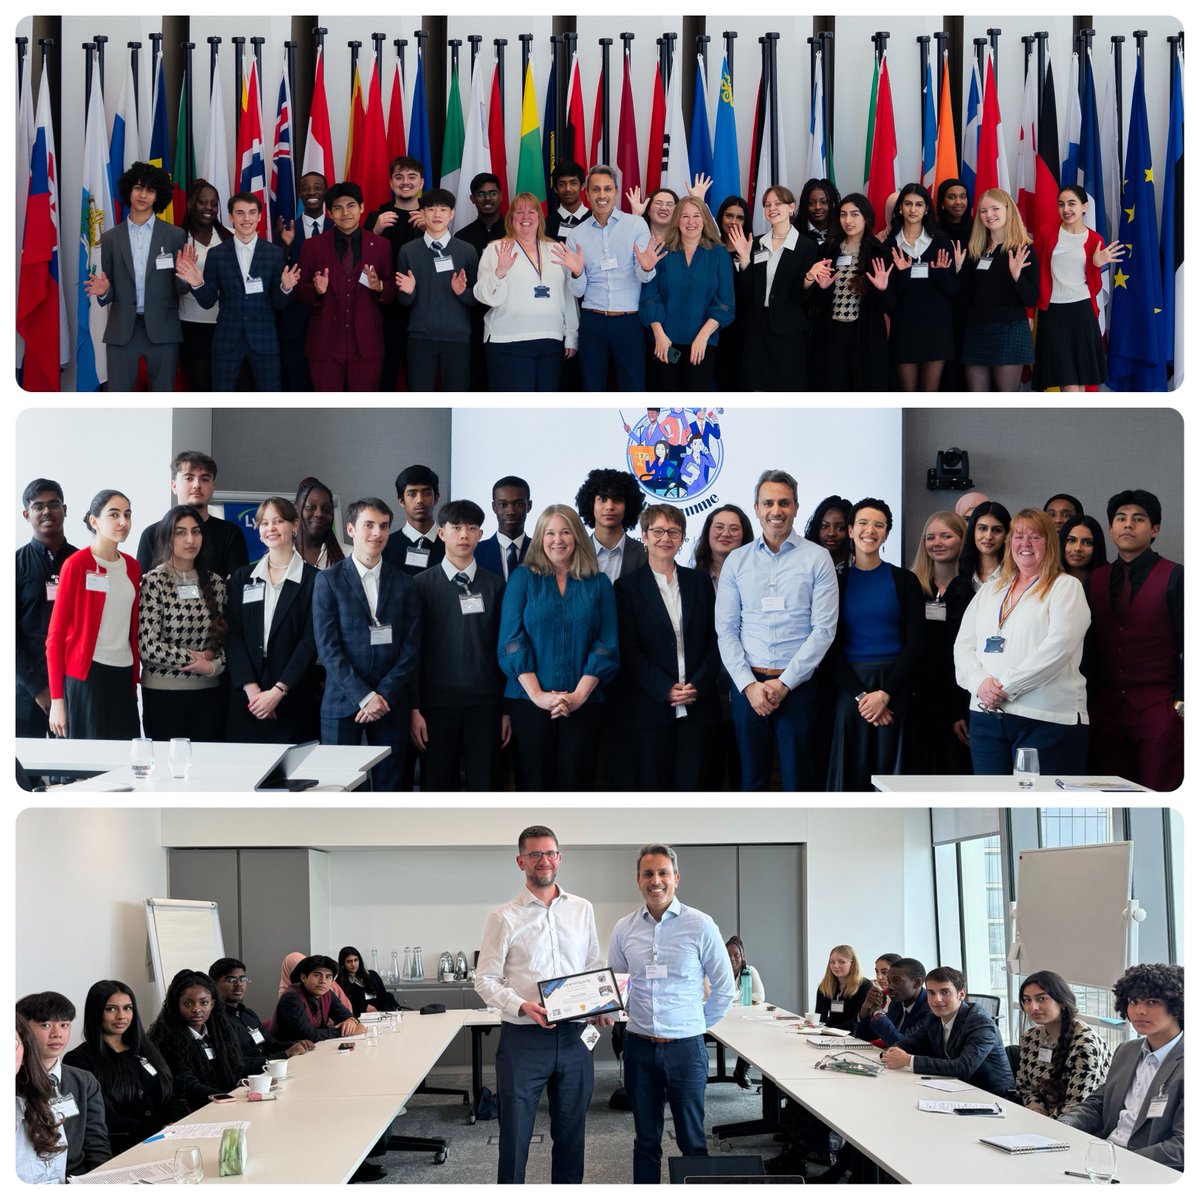 This week, our Future Leaders had the opportunity to hear from the president of the @EBRD @OdileRenaud and take part in an Ops Comm experience with David Allan. A huge thank you to EBRD’s D&I team for making this day possible! #EducateEngageEmpower